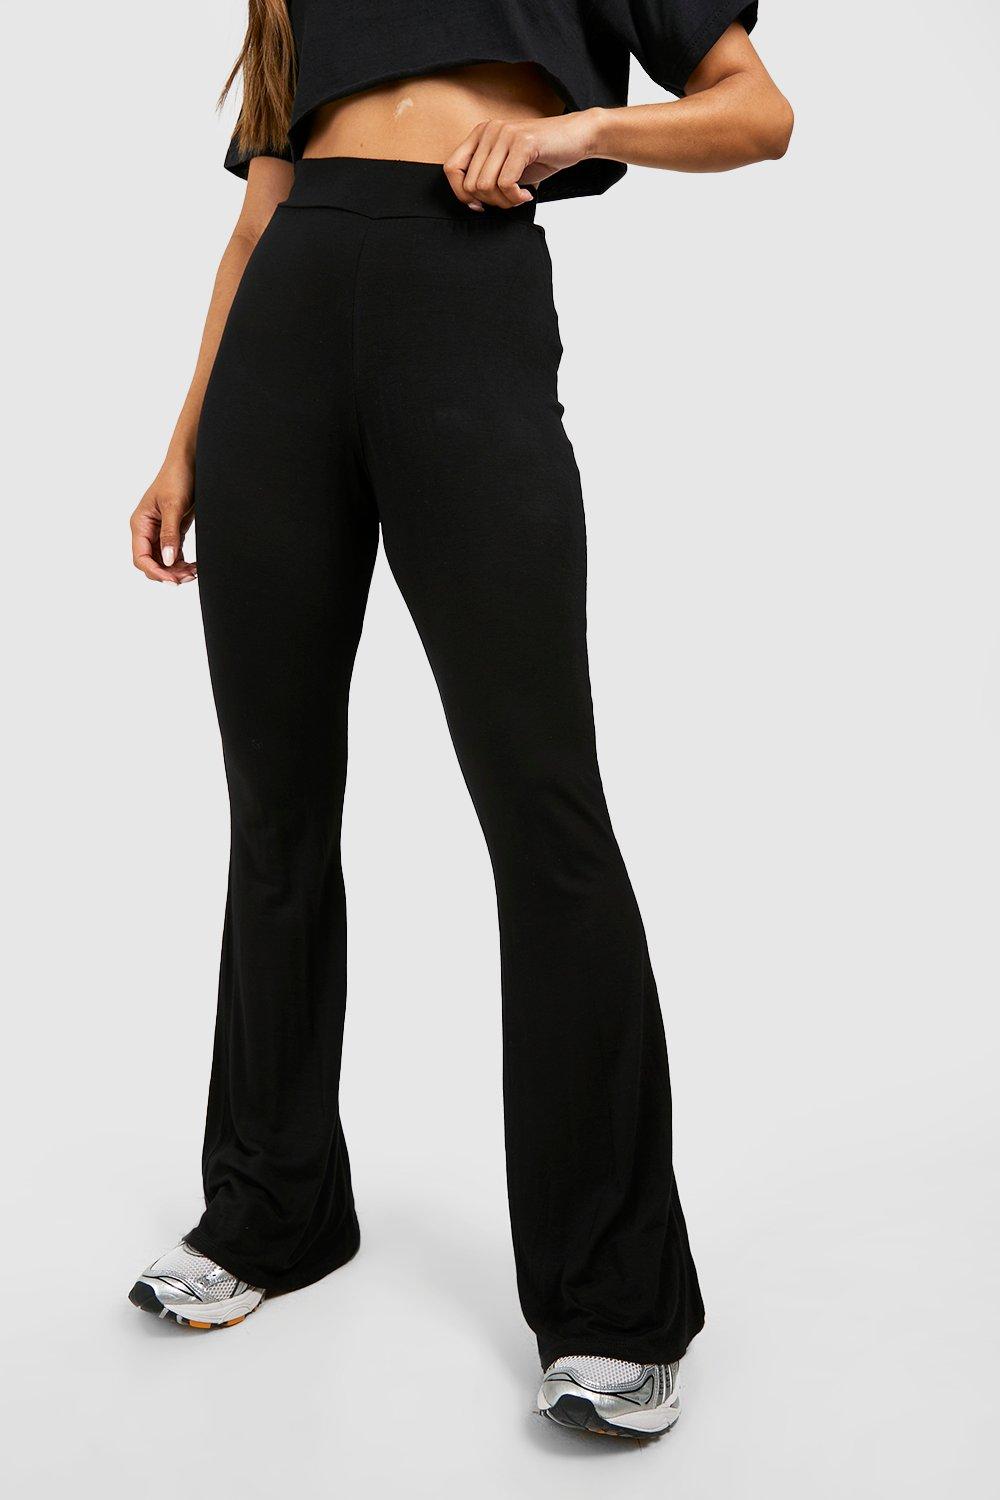 high waisted fit and flare pants